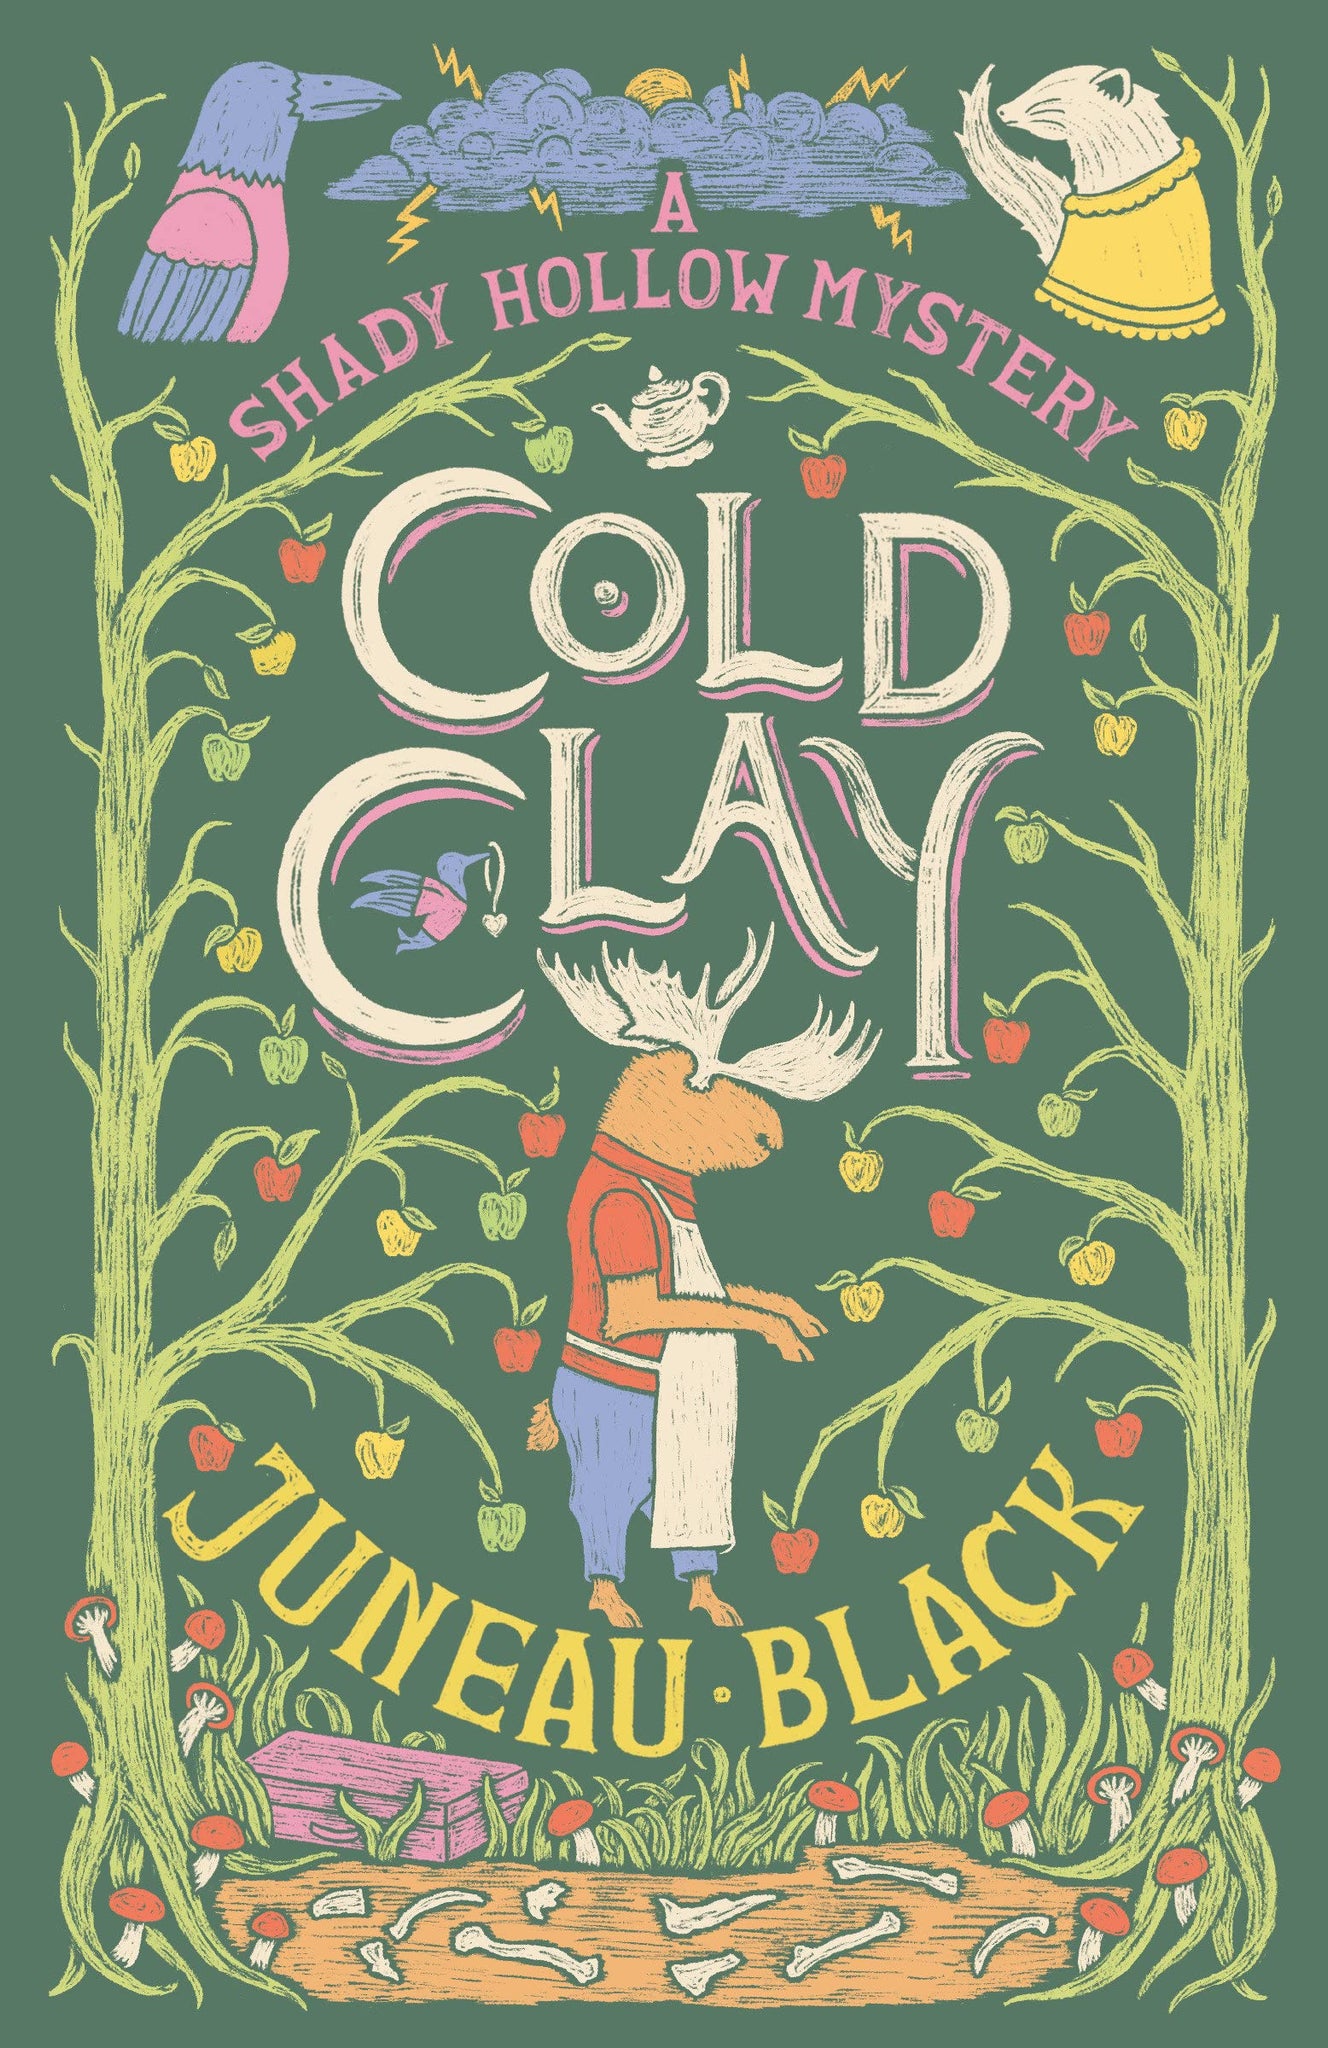 Shady Hollow #2 : Cold Clay by Juneau Black